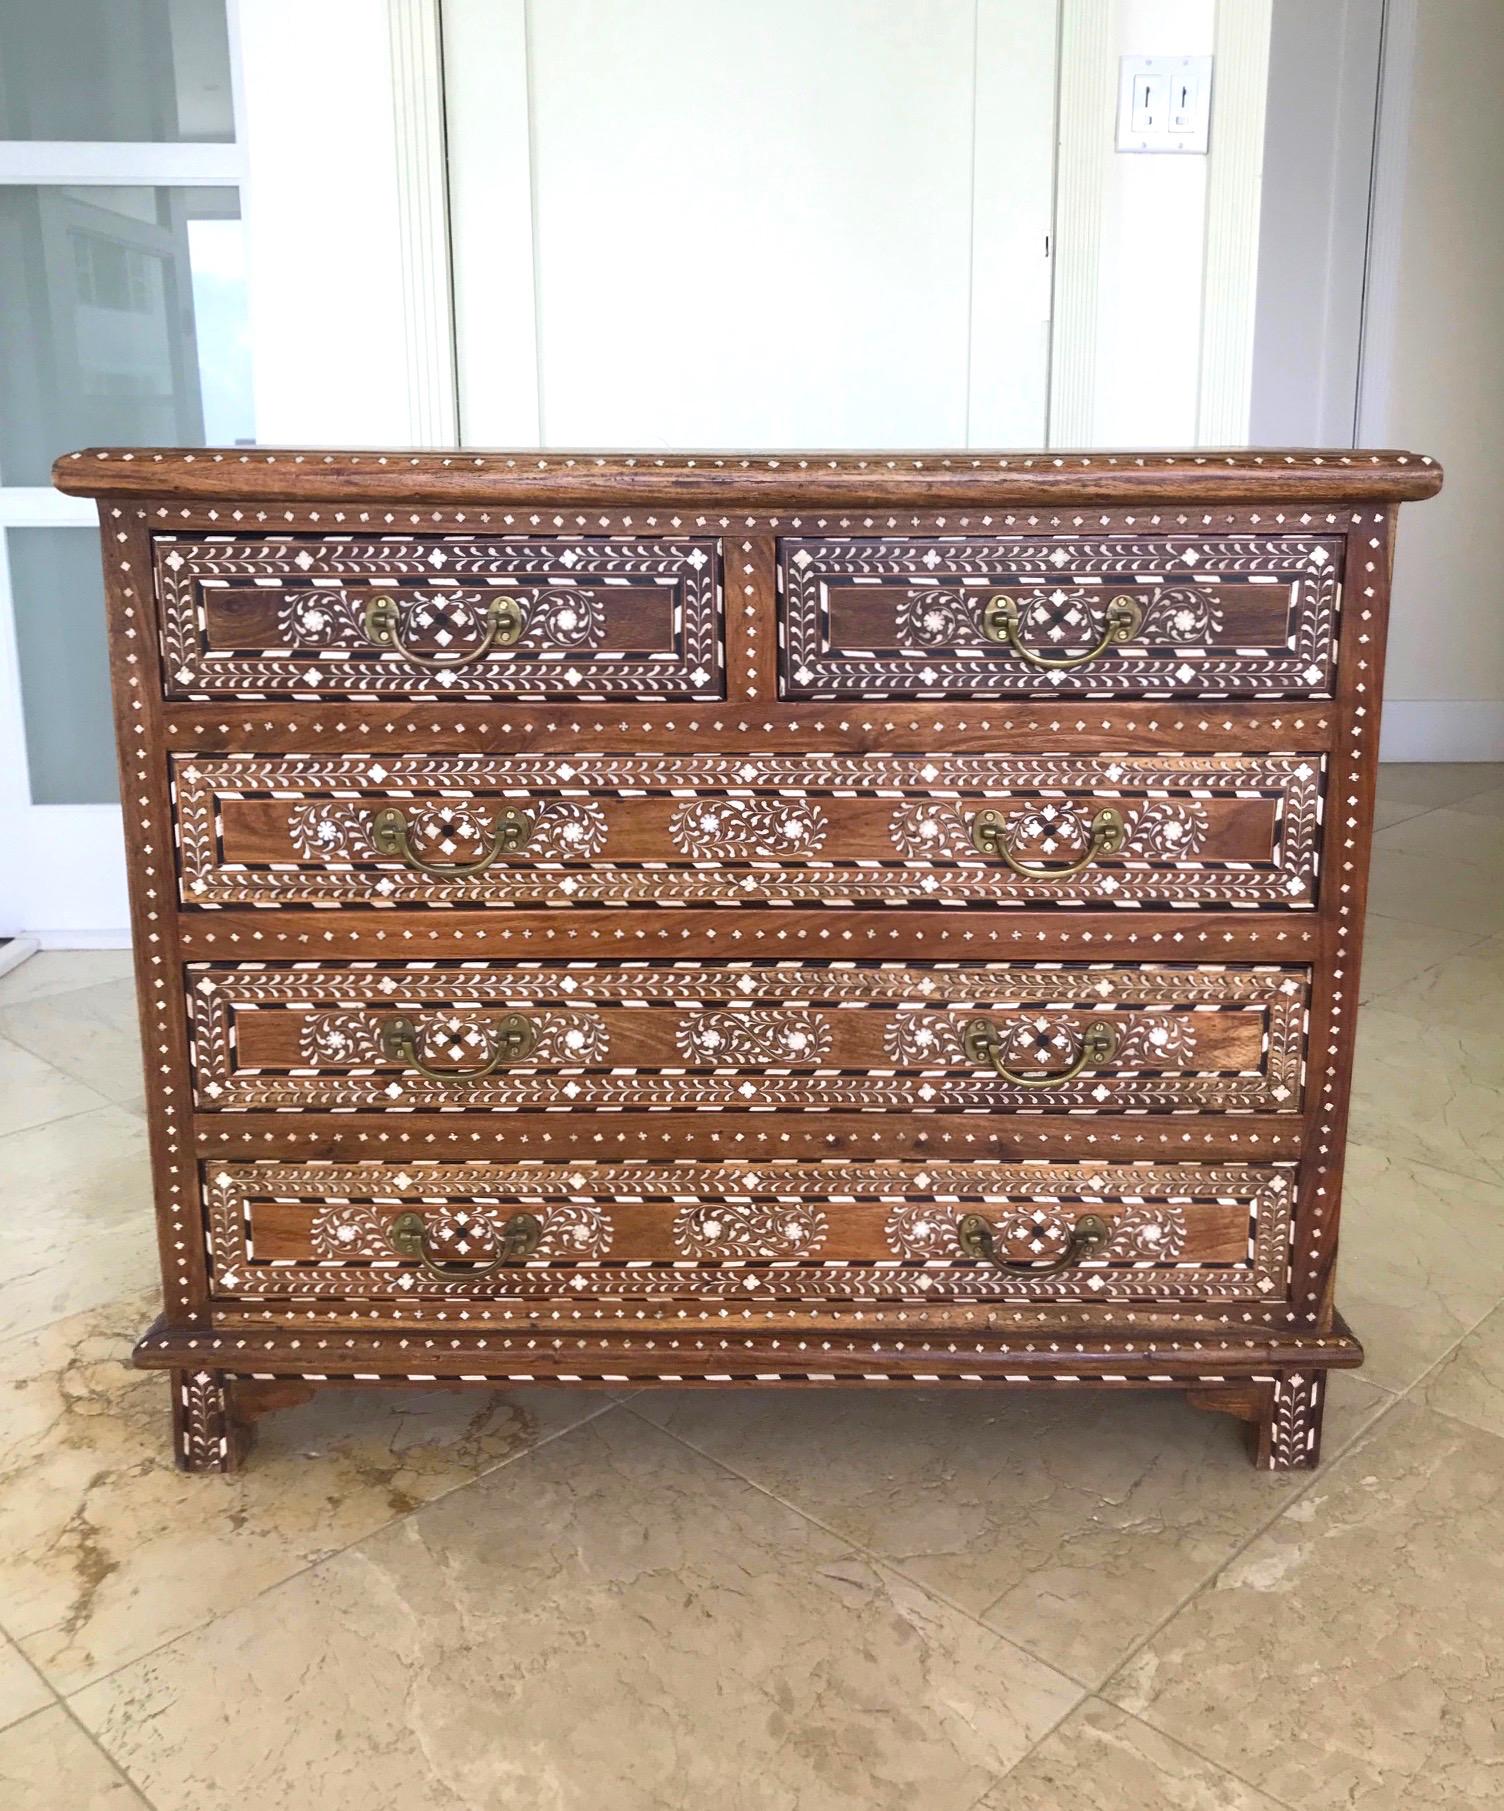 Moorish Exquisite Chest of Drawers with Bone Inlays and Marquetry Designs, 1970s